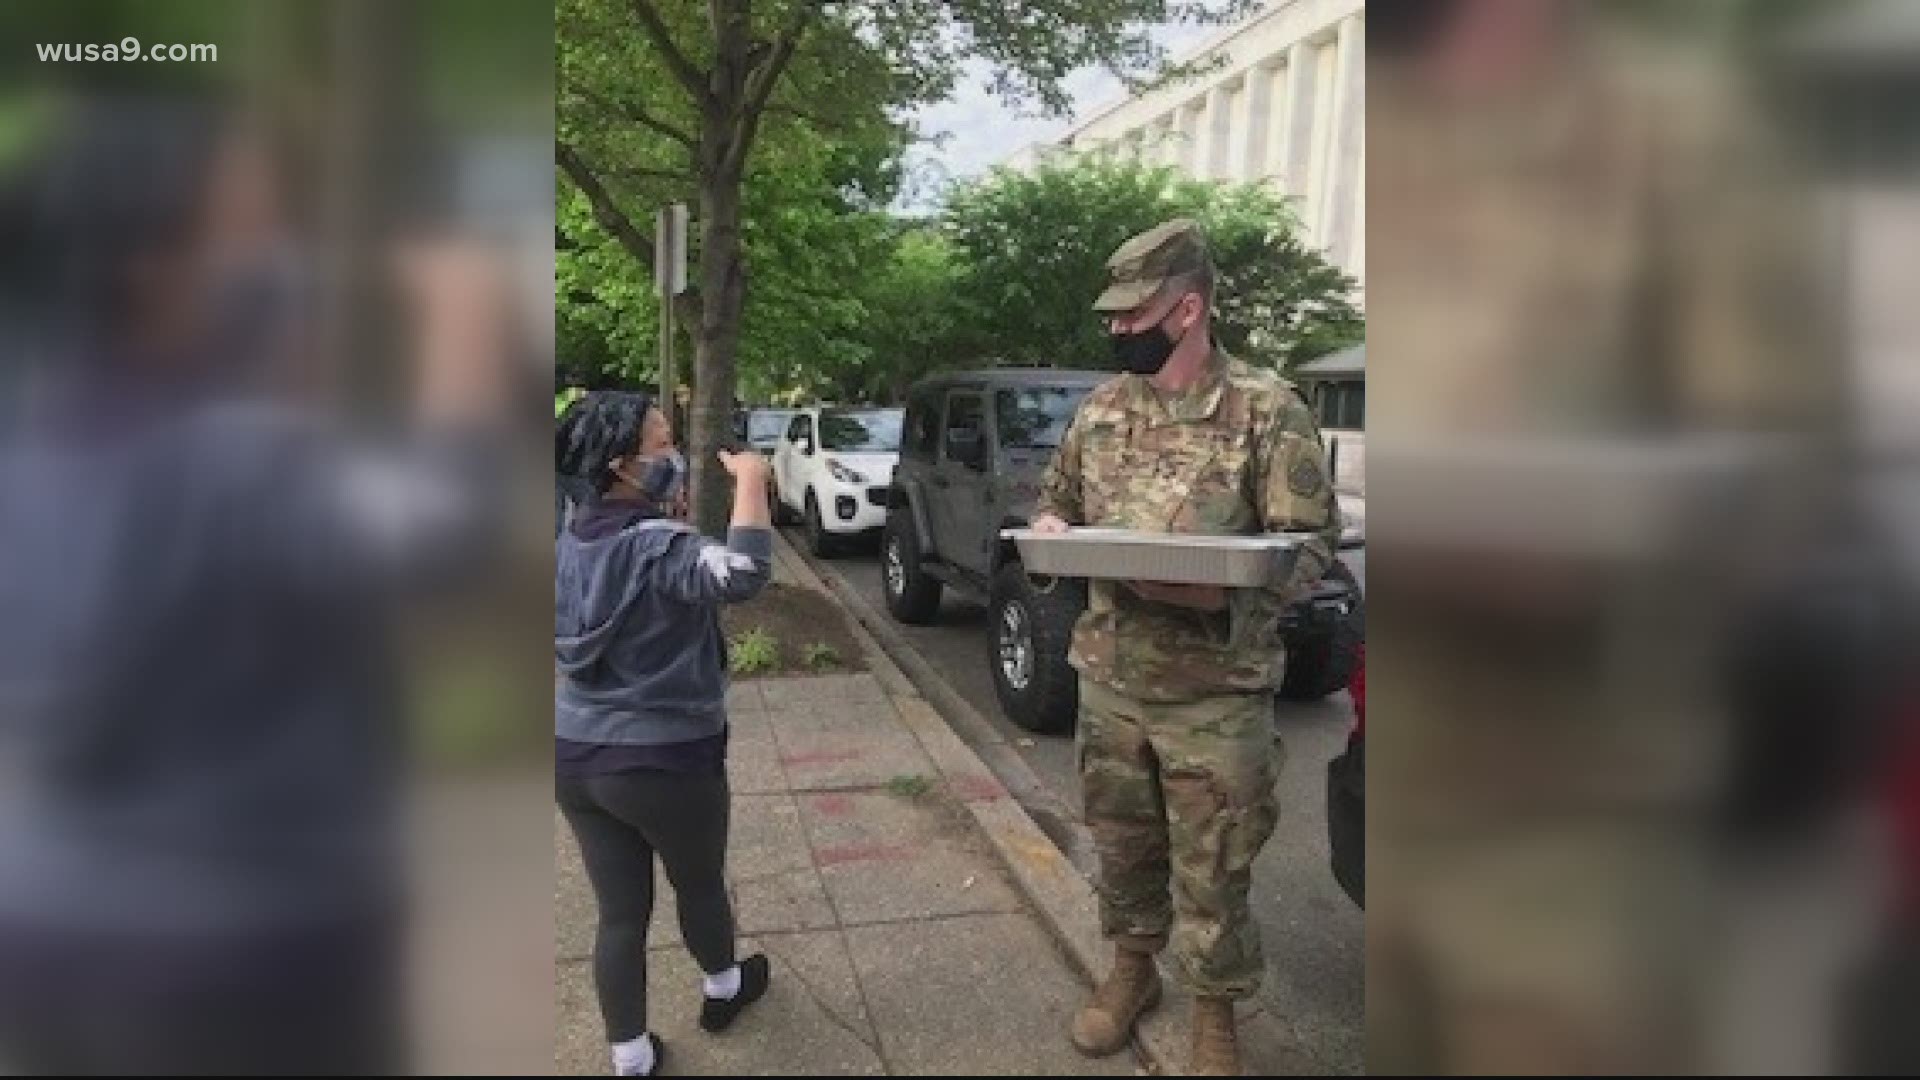 Pete's Diner has been feeding National Guard troops protecting the Capitol building since January.